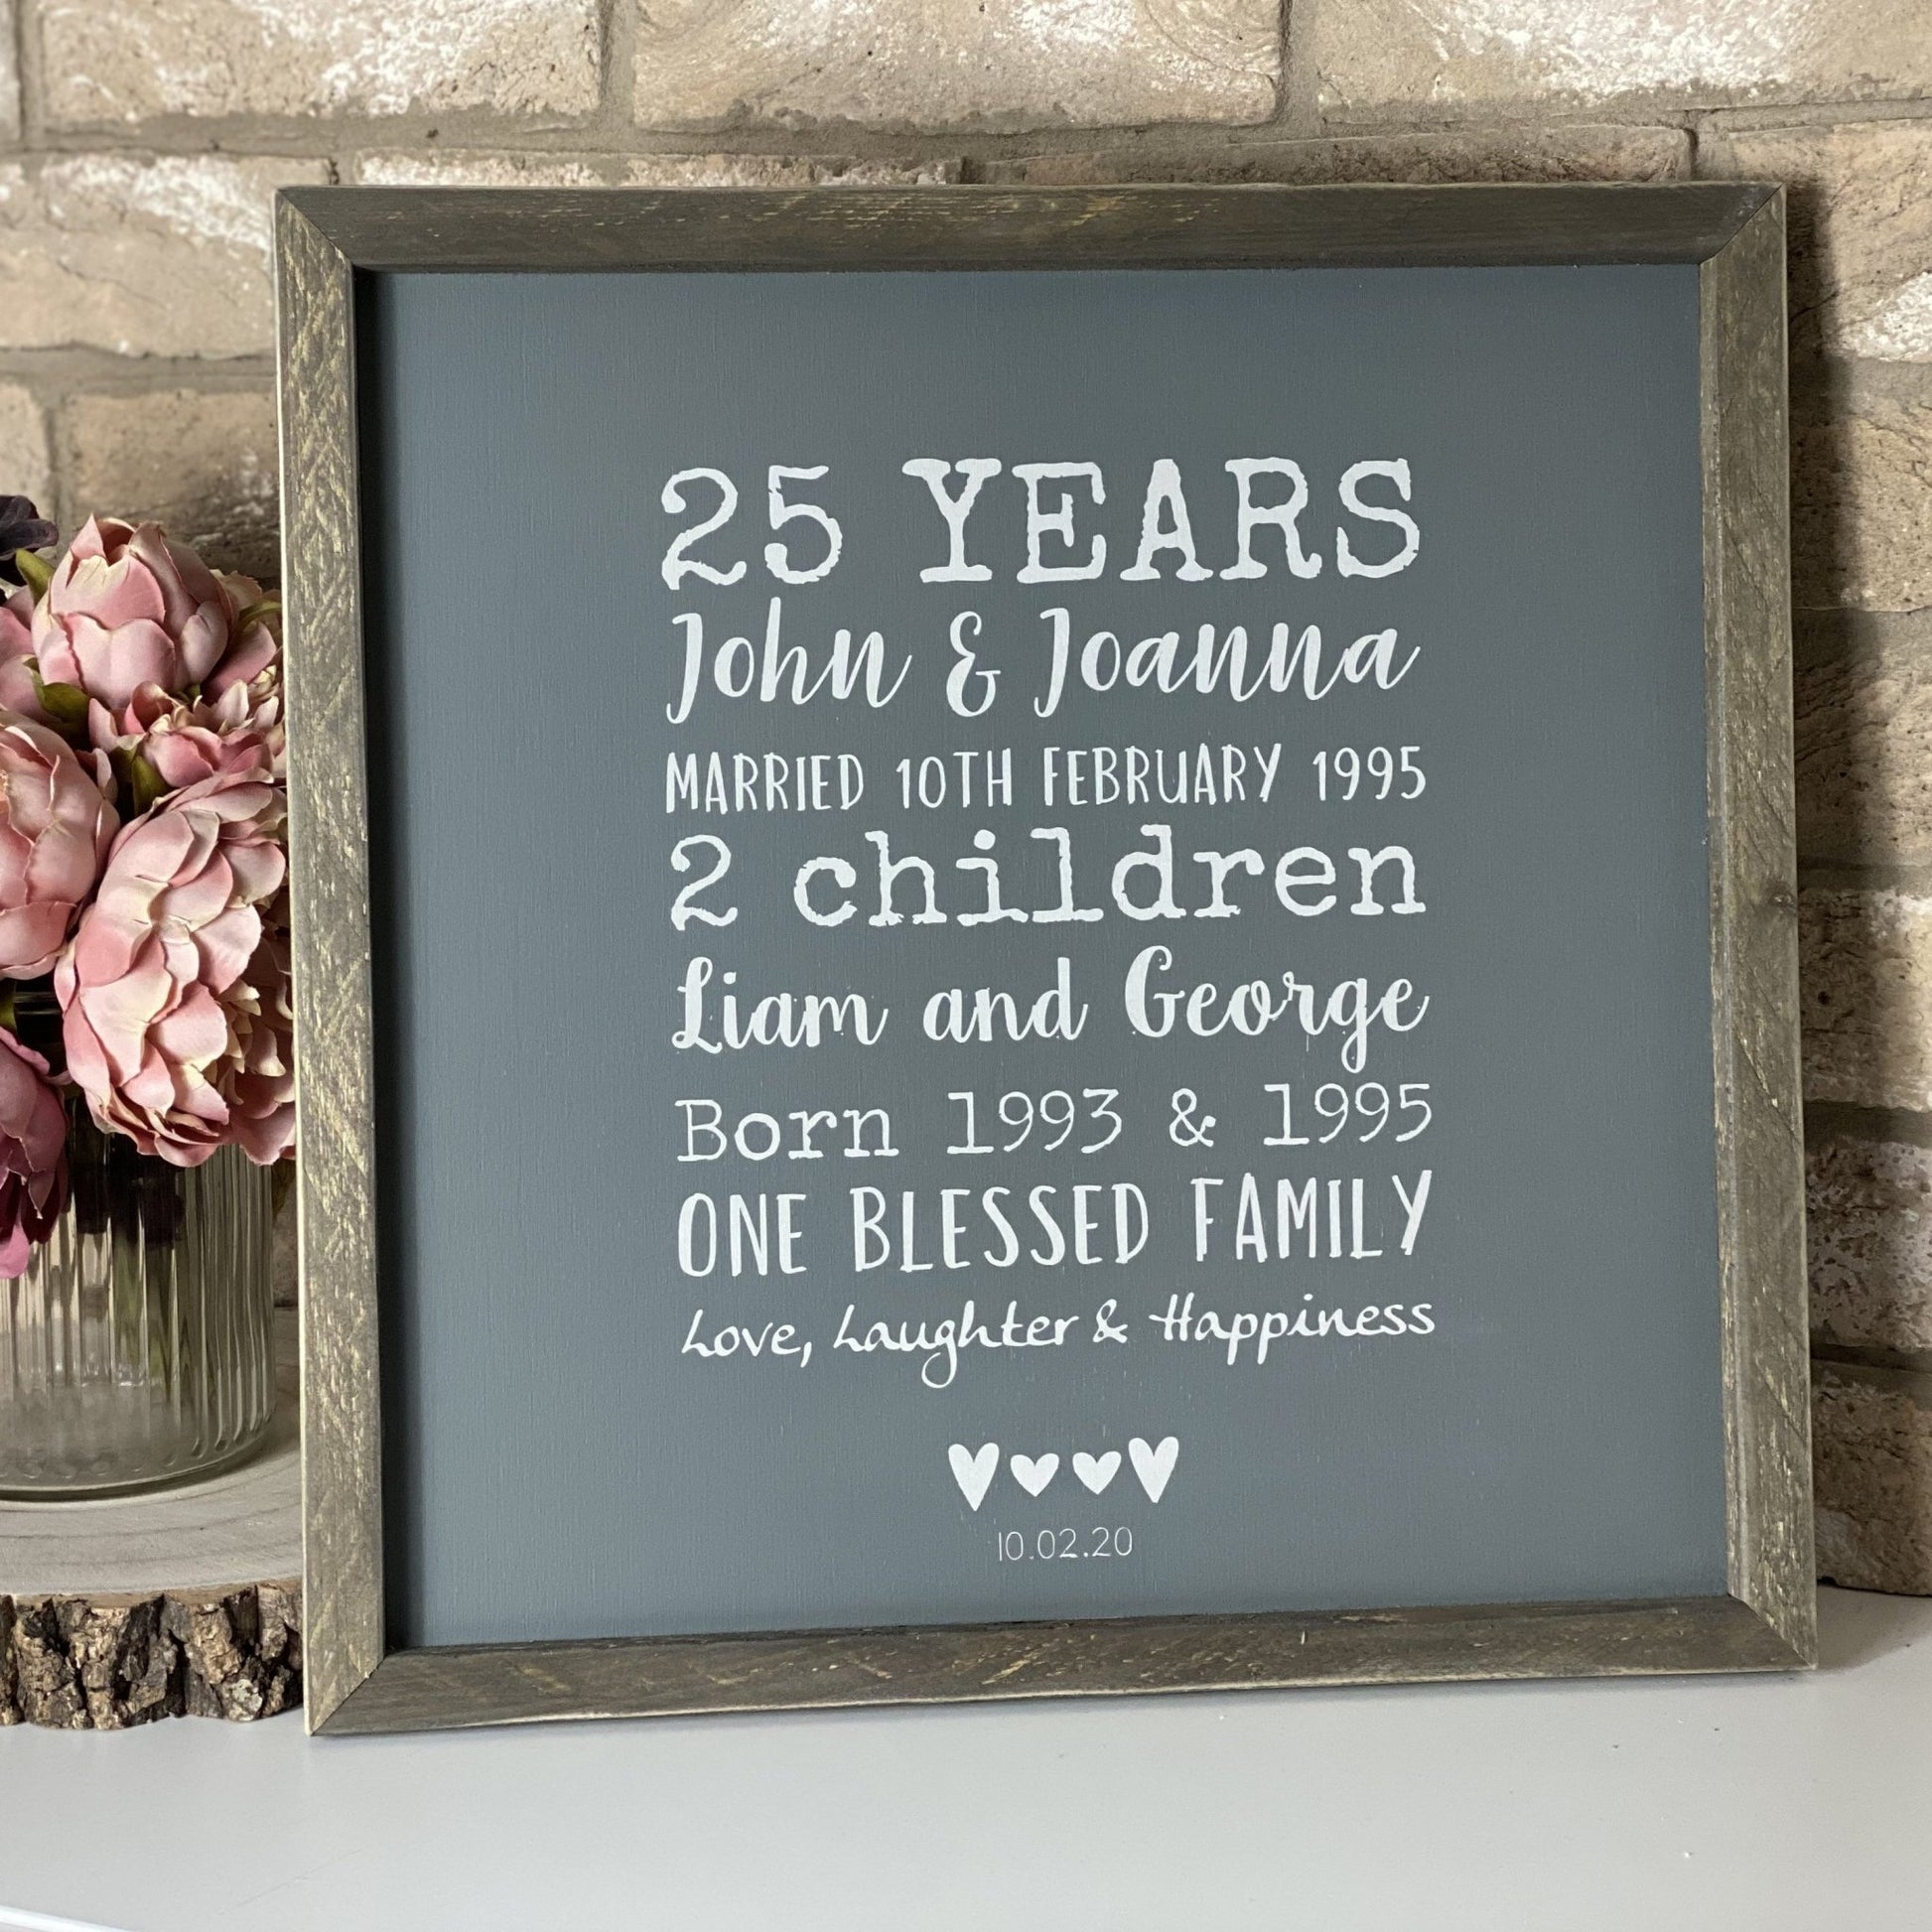 Personalised 25th Anniversary sign | Framed Wood Sign - The Imperfect Wood Company - Framed Wood Sign